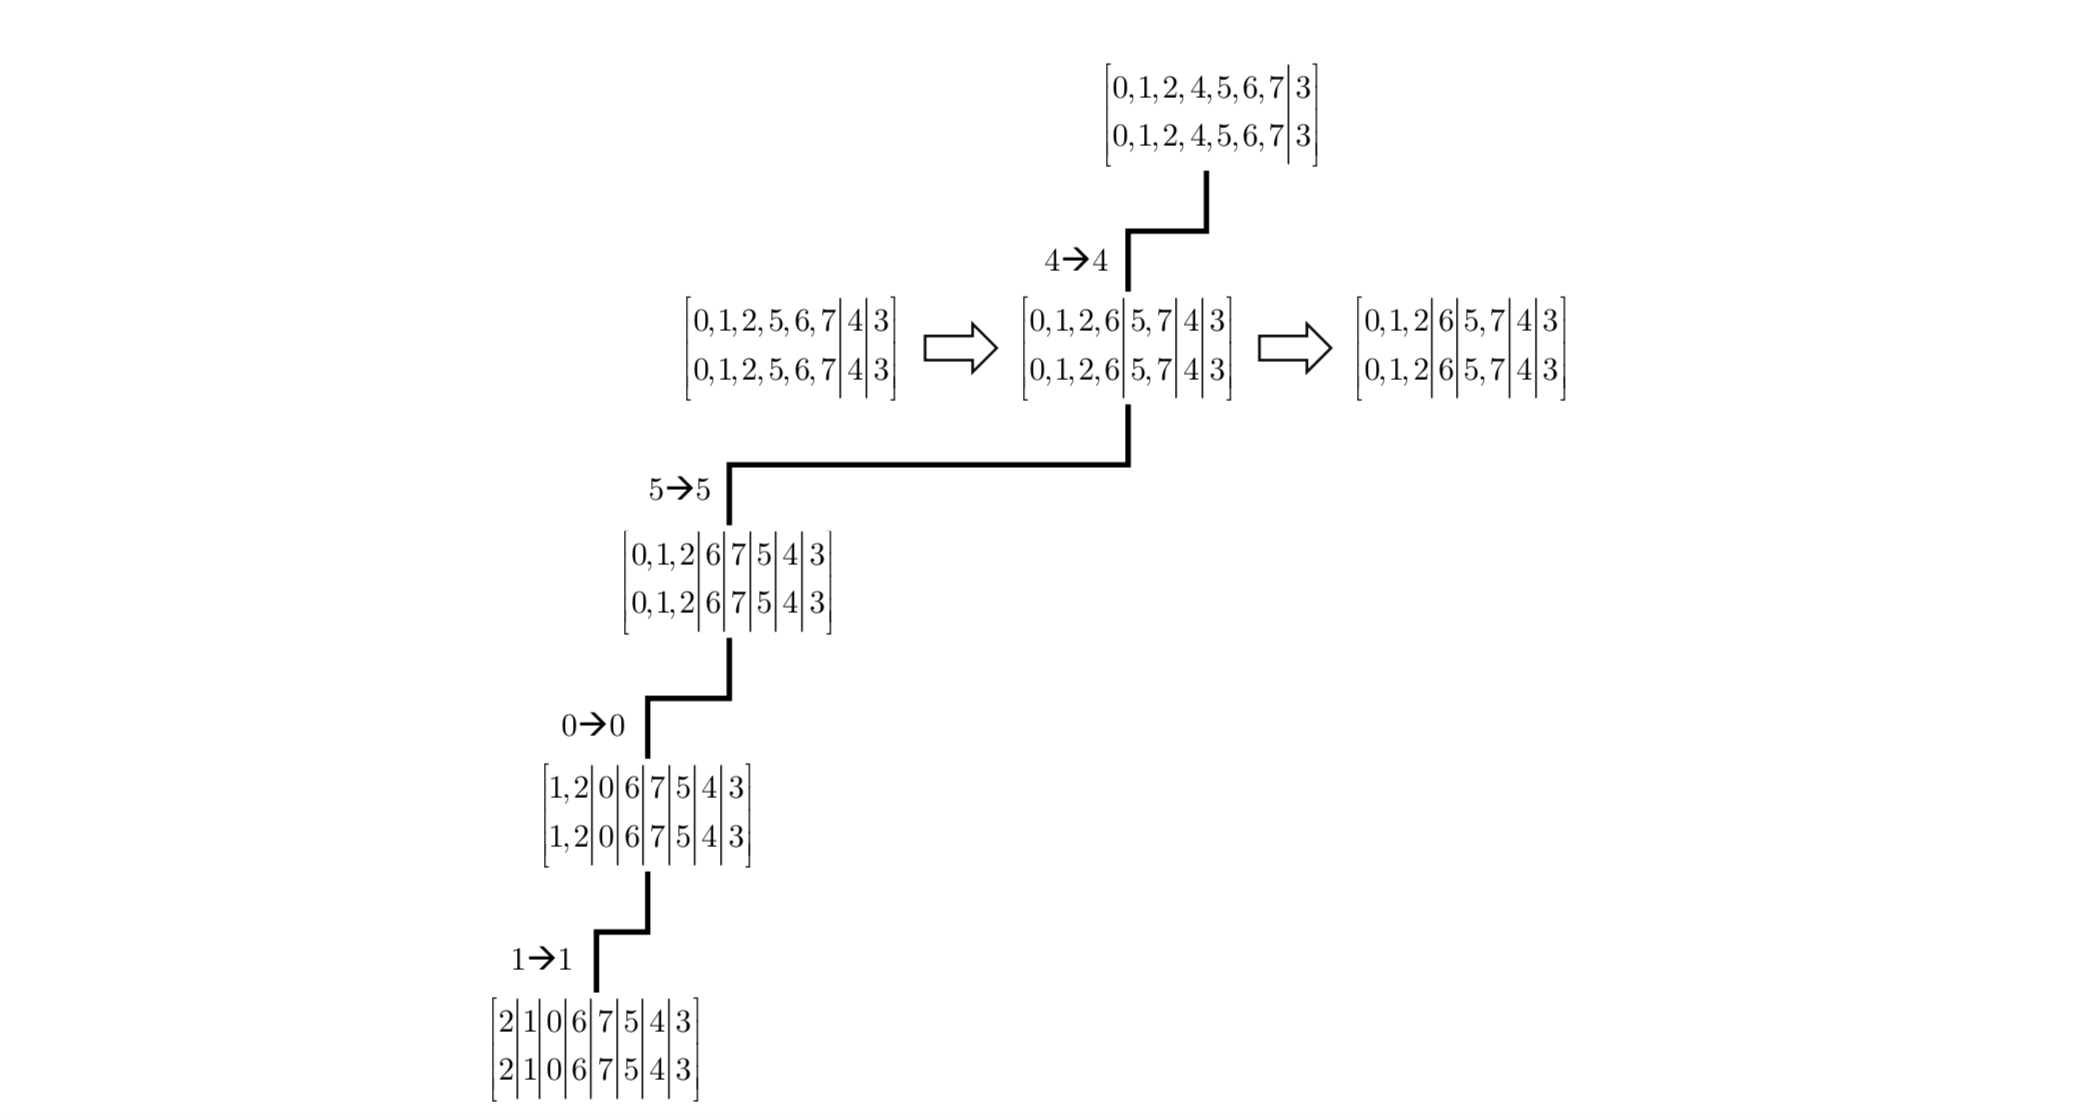 Example of Subgroup Decomposition for Graph in Figure